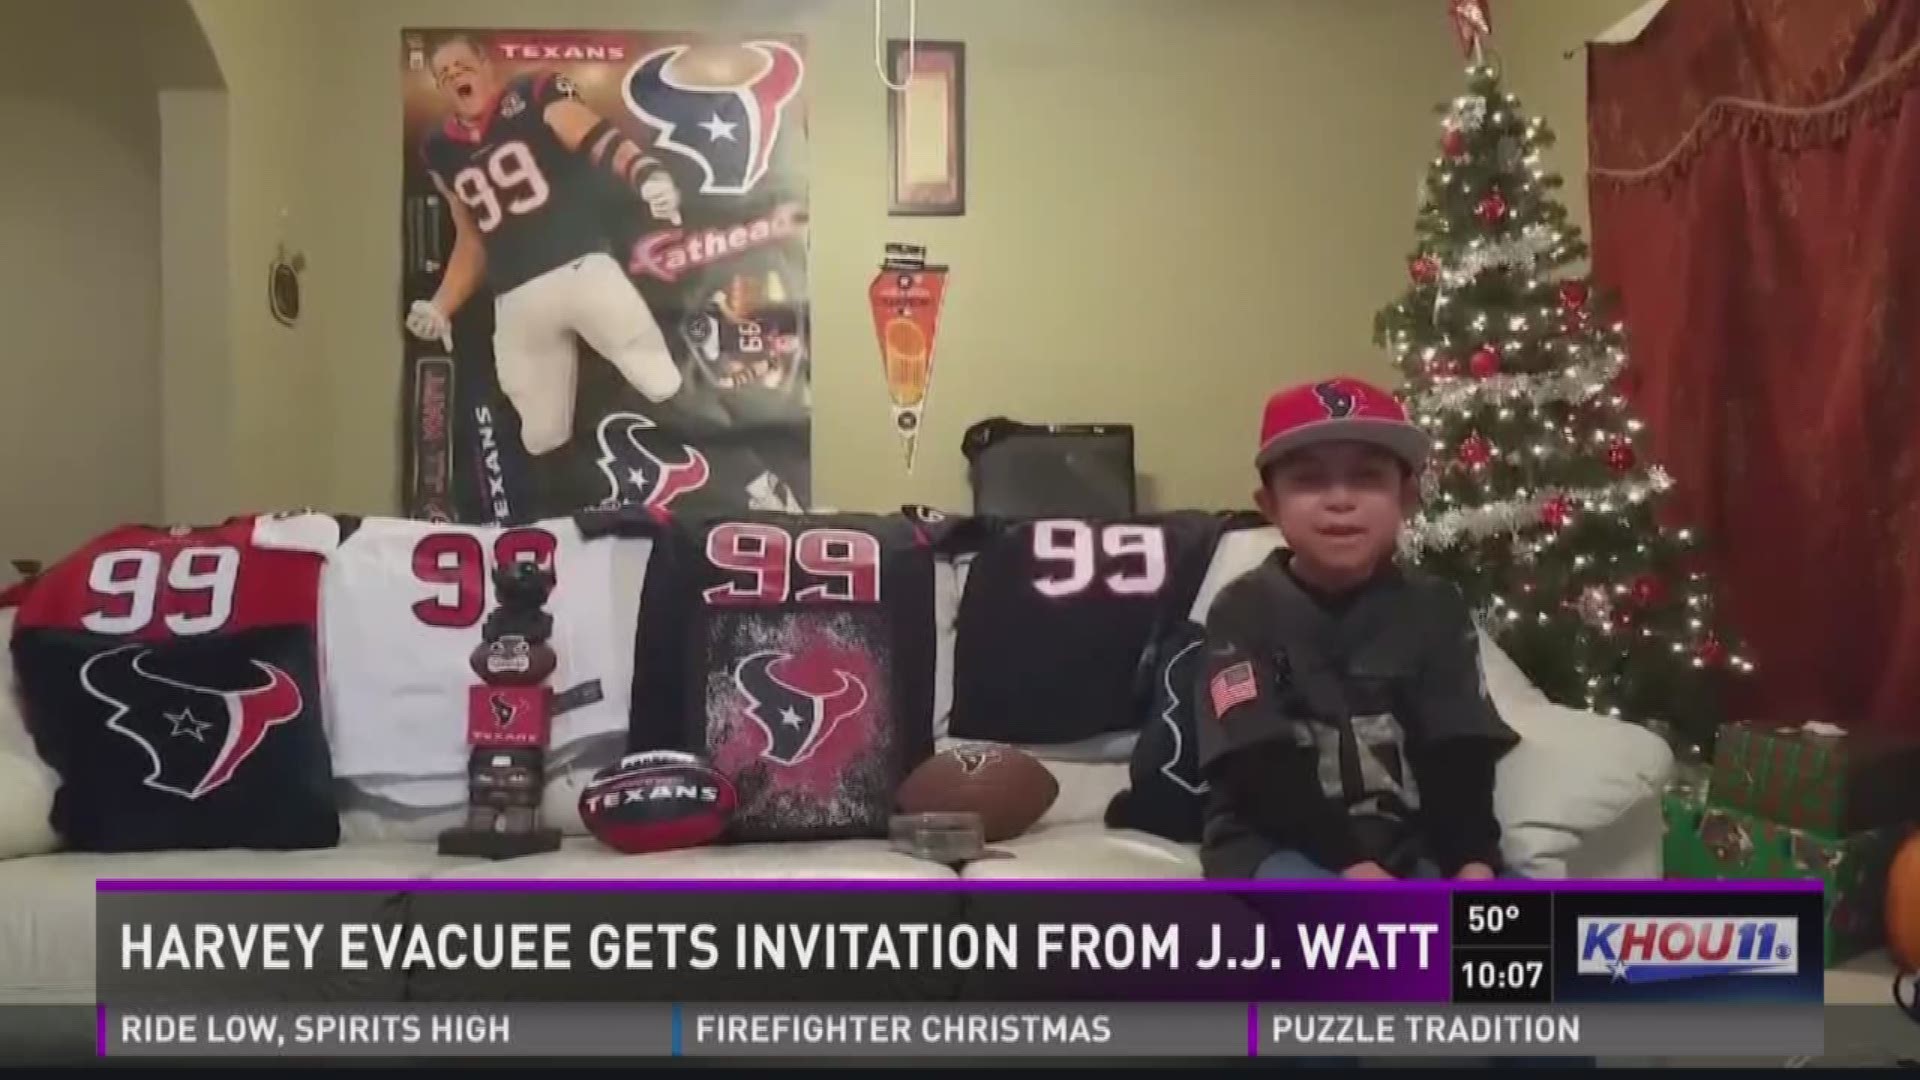 Evacuated by Hurricane Harvey, a 10 year old cancer patient had to move all the way to Nebraska to get care, and now that boy is cancer free and has the attention of his favorite Texans player.